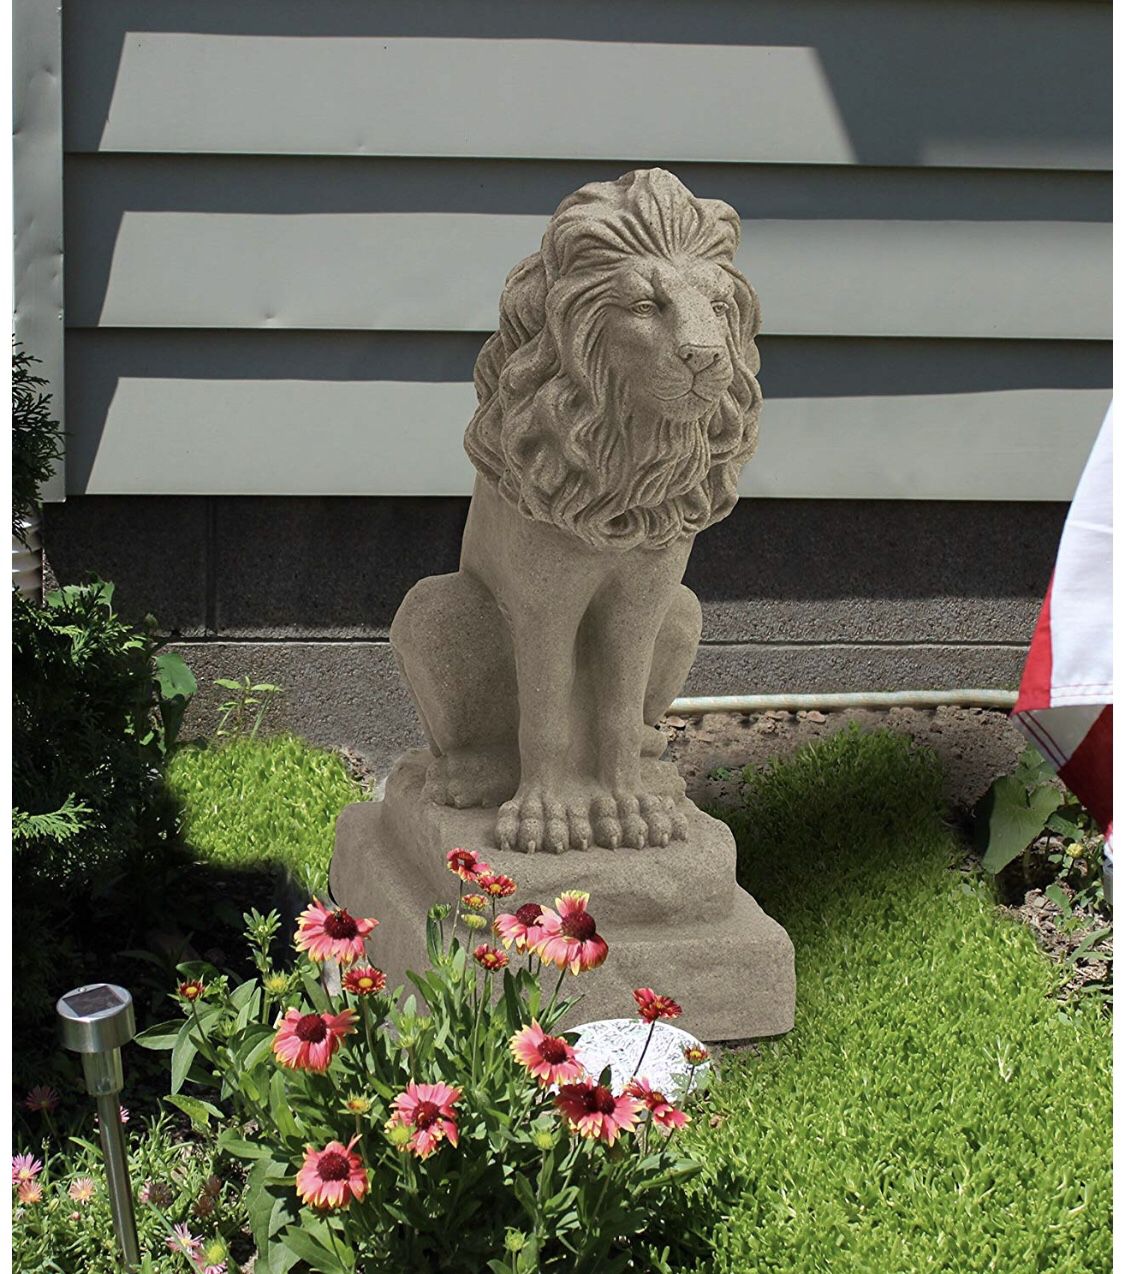 Guardian Lion Statue – Natural Sandstone Appearance – Made of Resin outside garden lawn mower area patio furniture set tiger animal